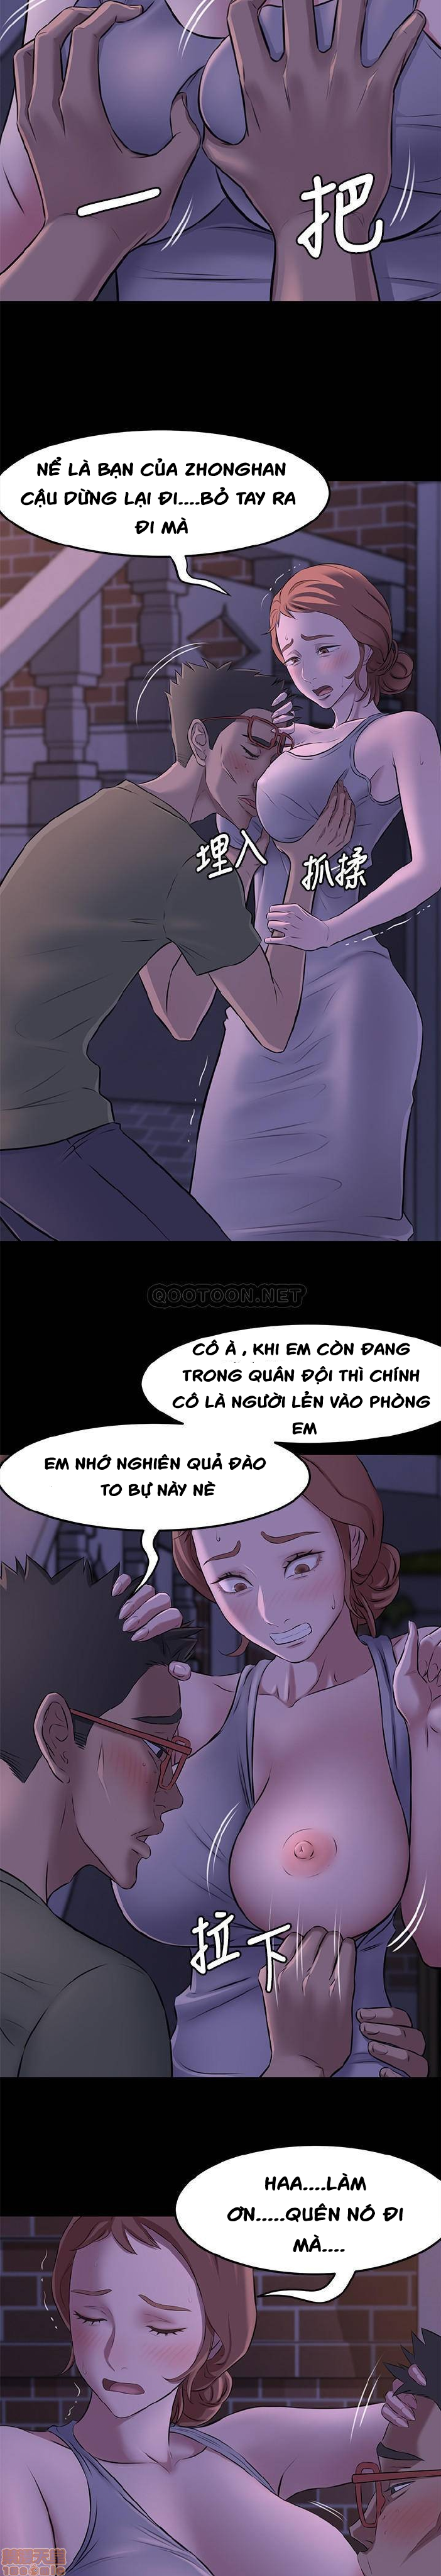 Chapter 002 : Chapter 02 ảnh 16